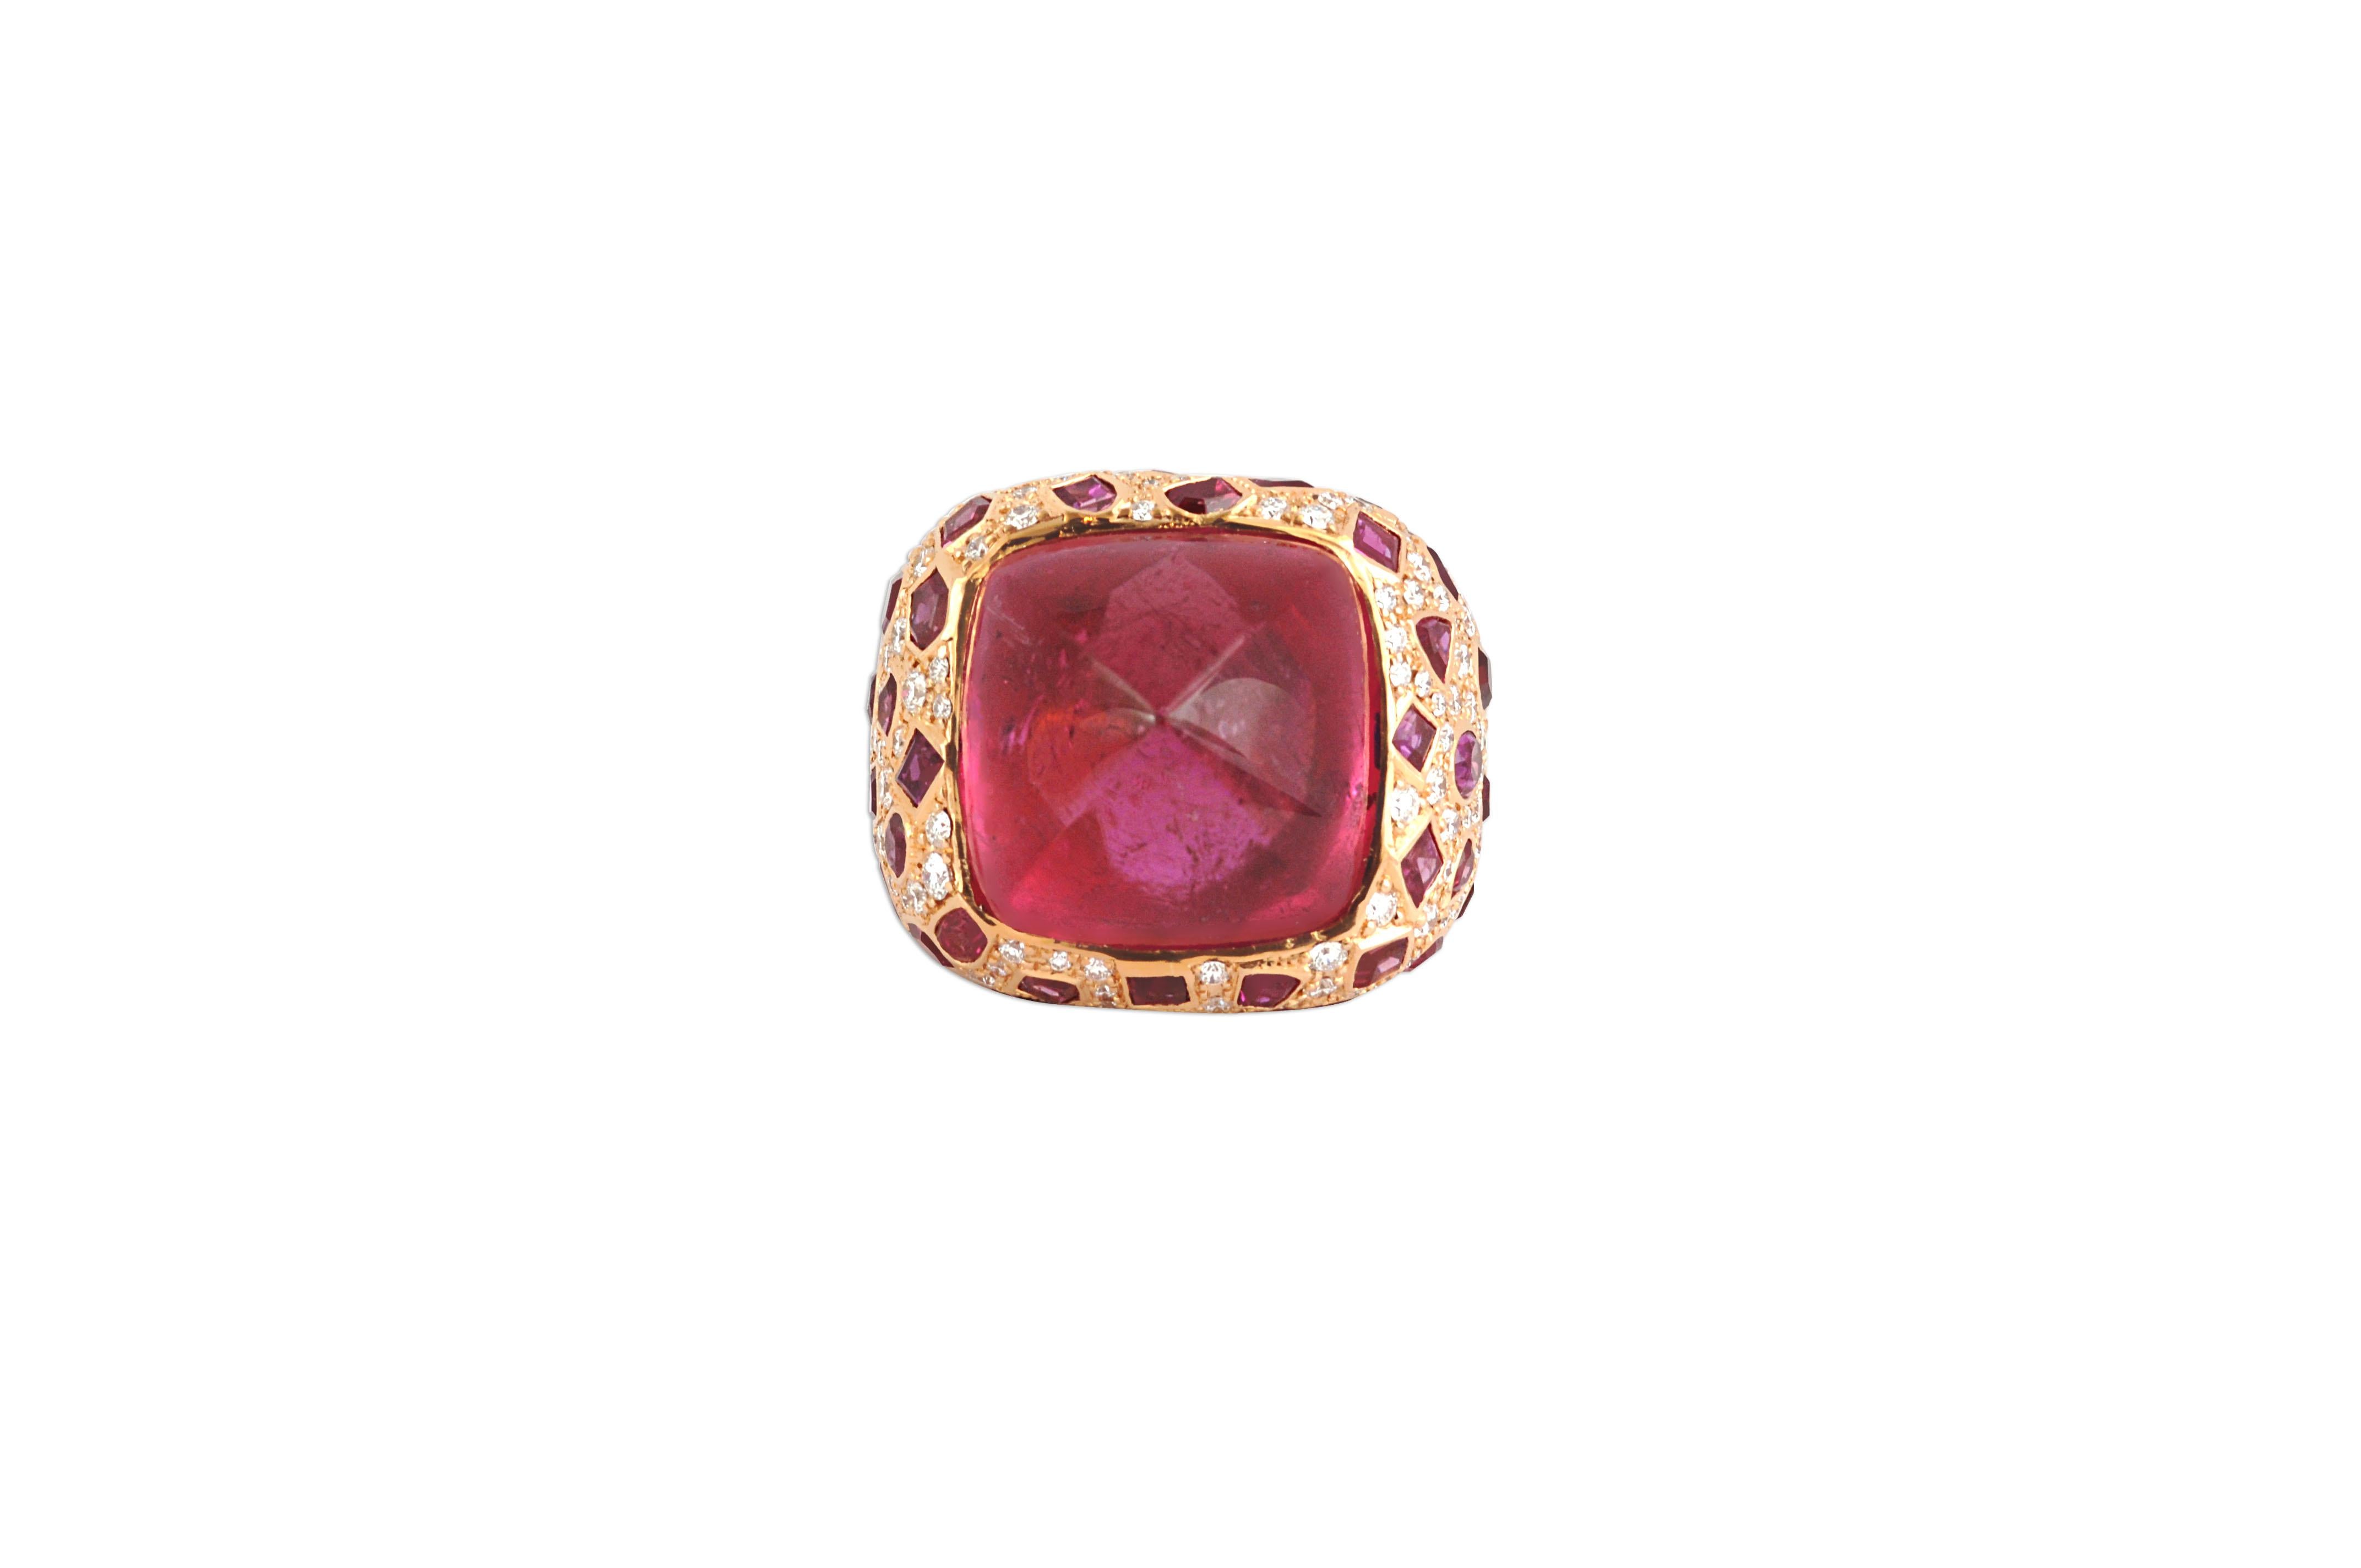 A truly one-of-a-kind Cabochon Sugarloaf-cut Rubellite 24.19 carats, Ruby 5.0 carats with Diamond 1.34 carats Ring Set in 18 Karat Pink Gold Settings


Width: 2.3 cm
Lenght: 2.3 cm 
Ring Size: 53

